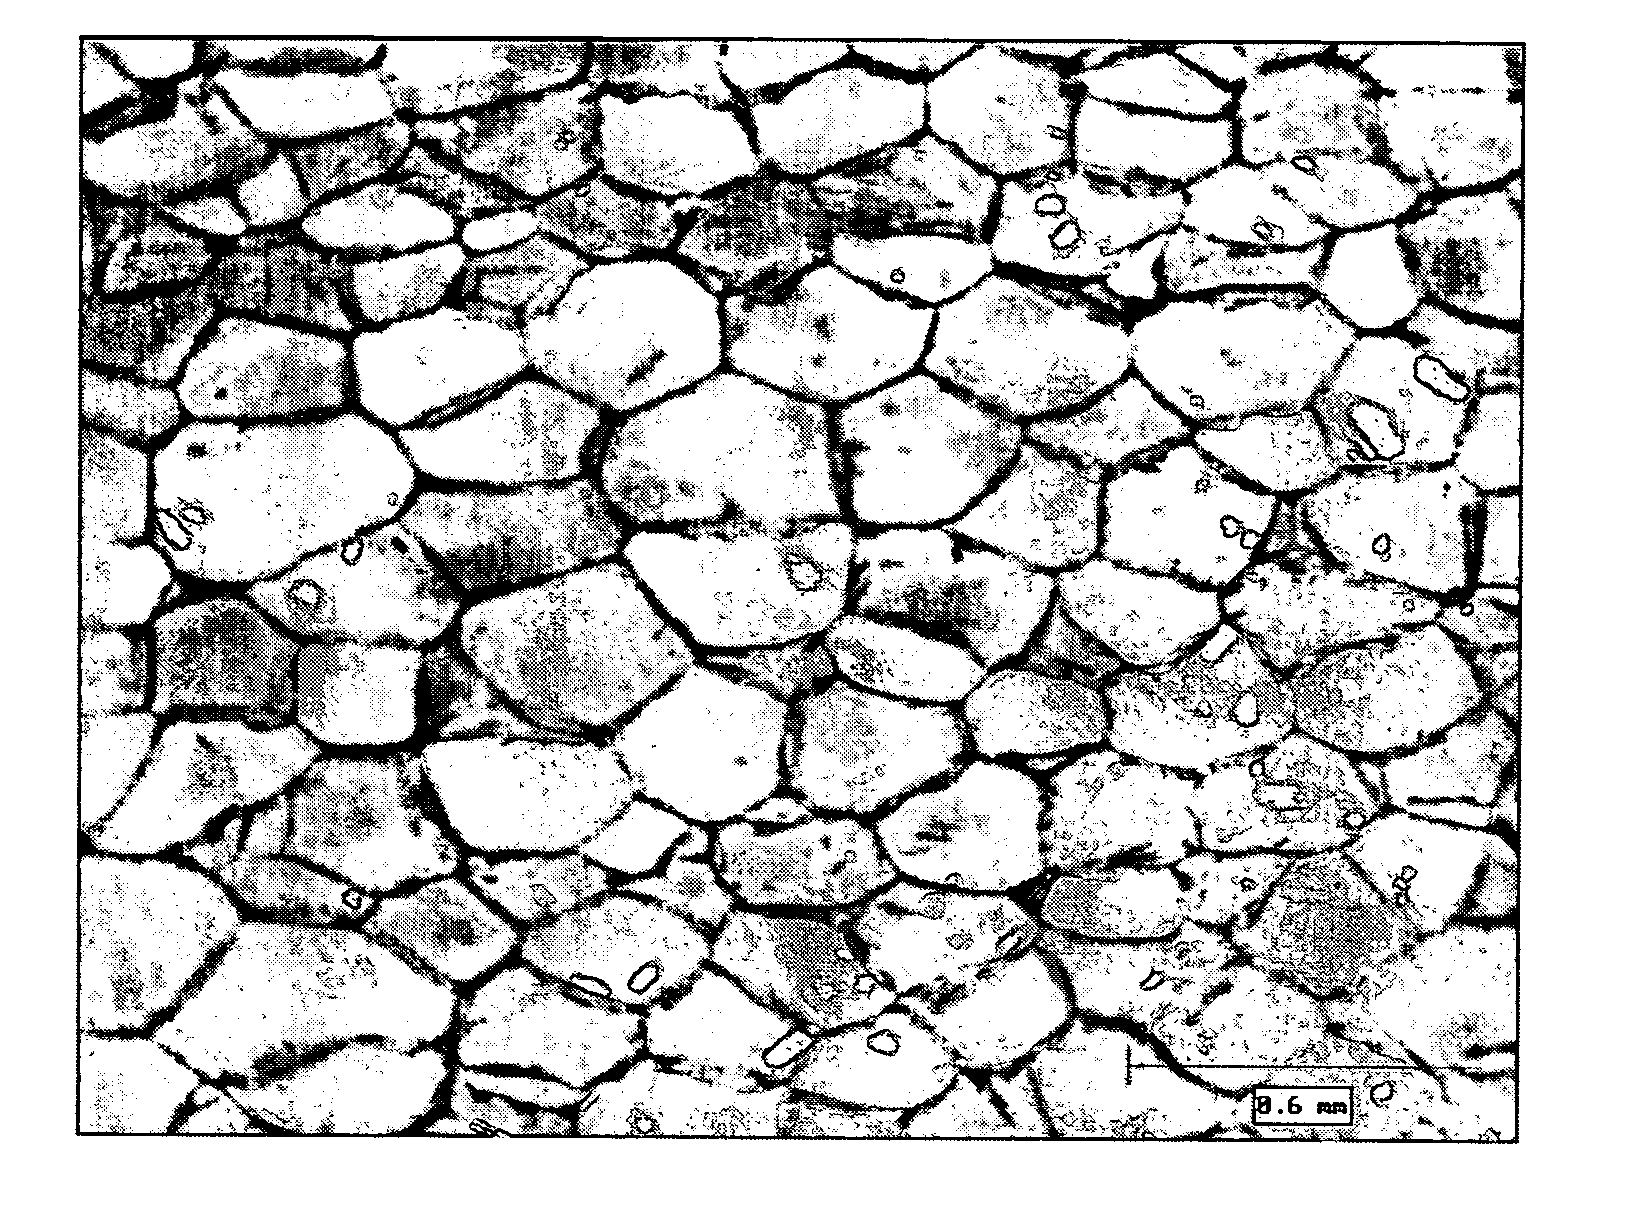 Method of forming thermoplastic foams using nano-particles to control cell morphology